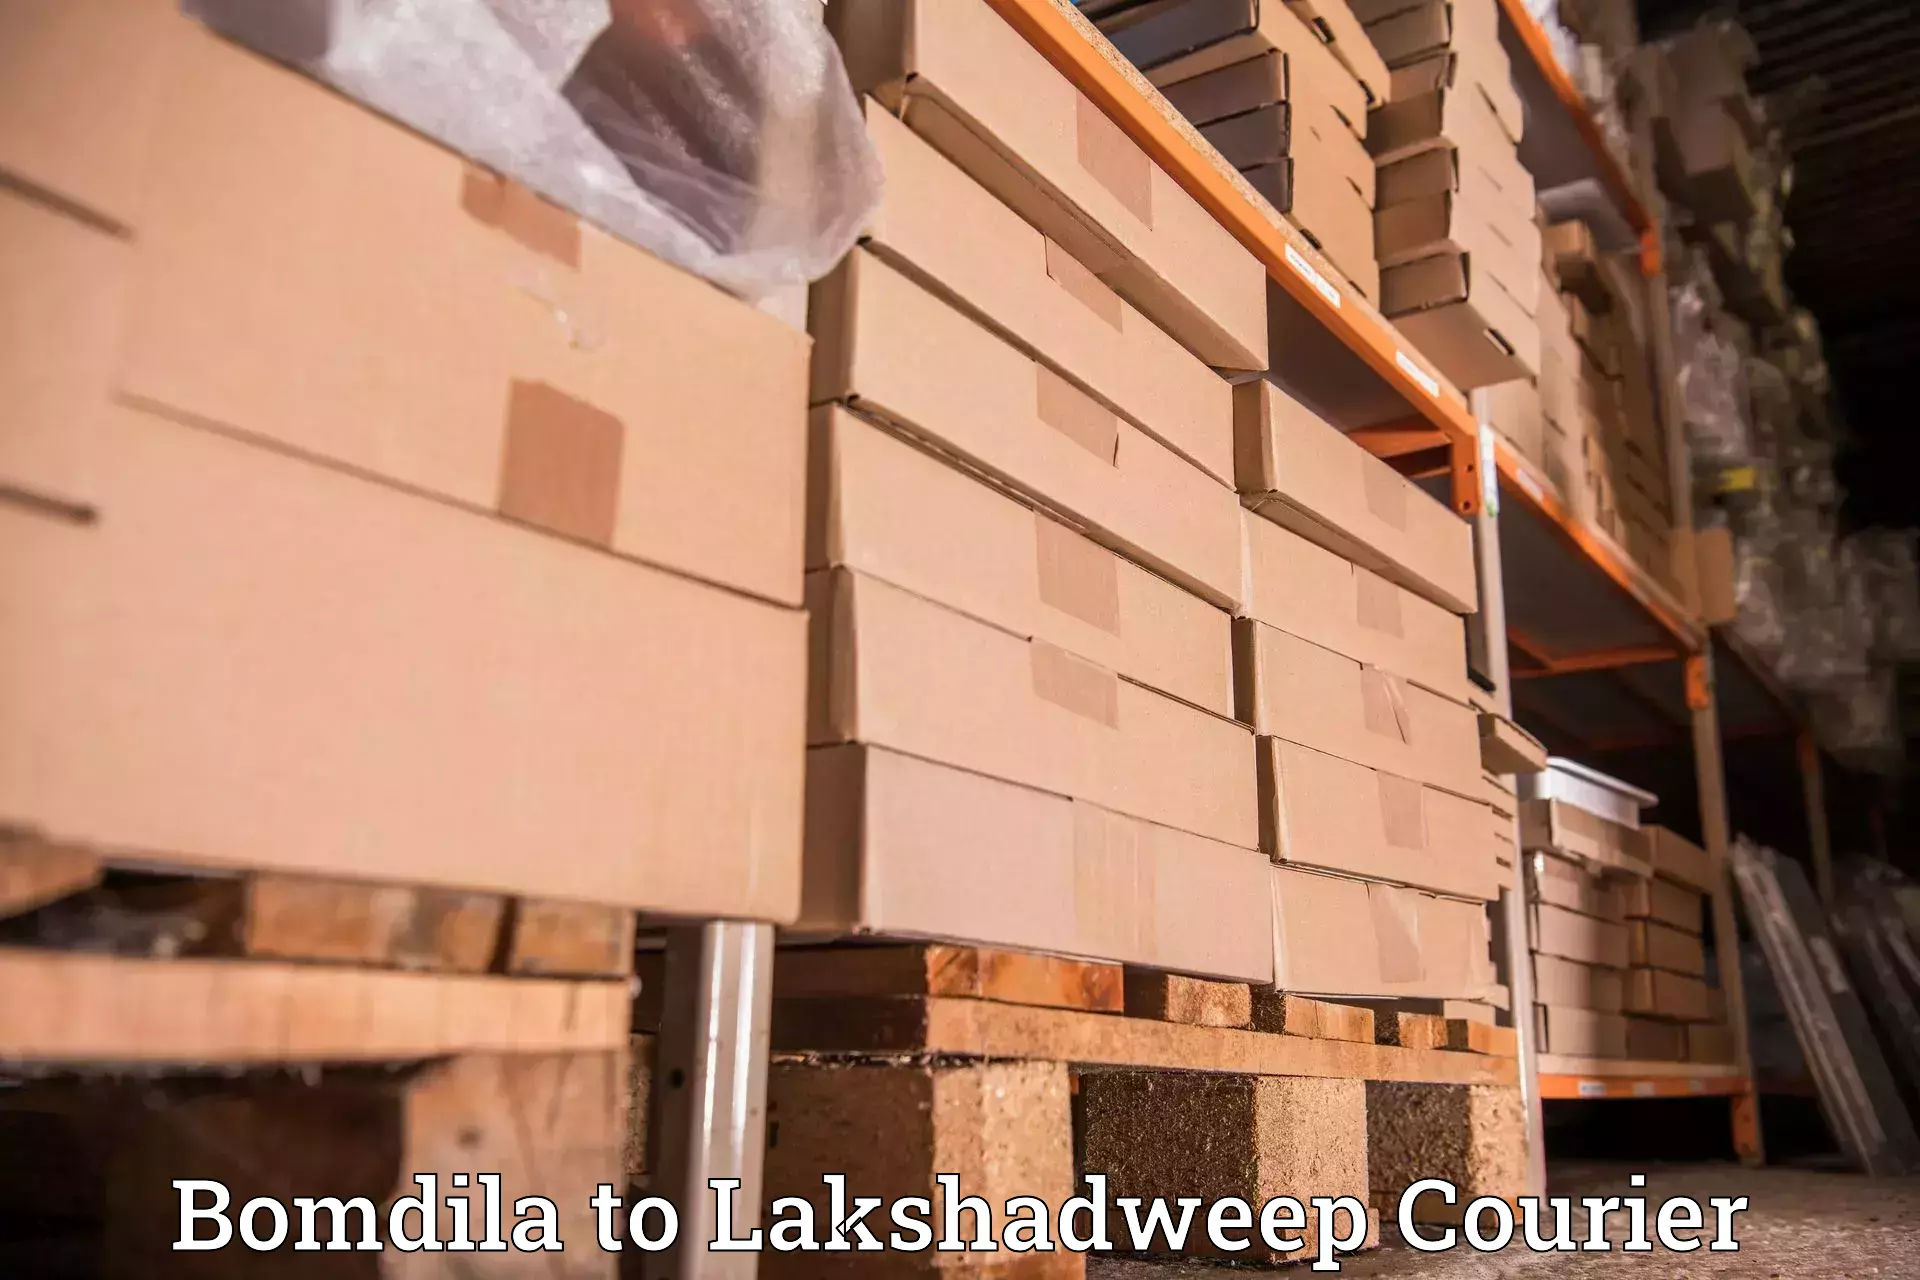 Courier tracking online Bomdila to Lakshadweep